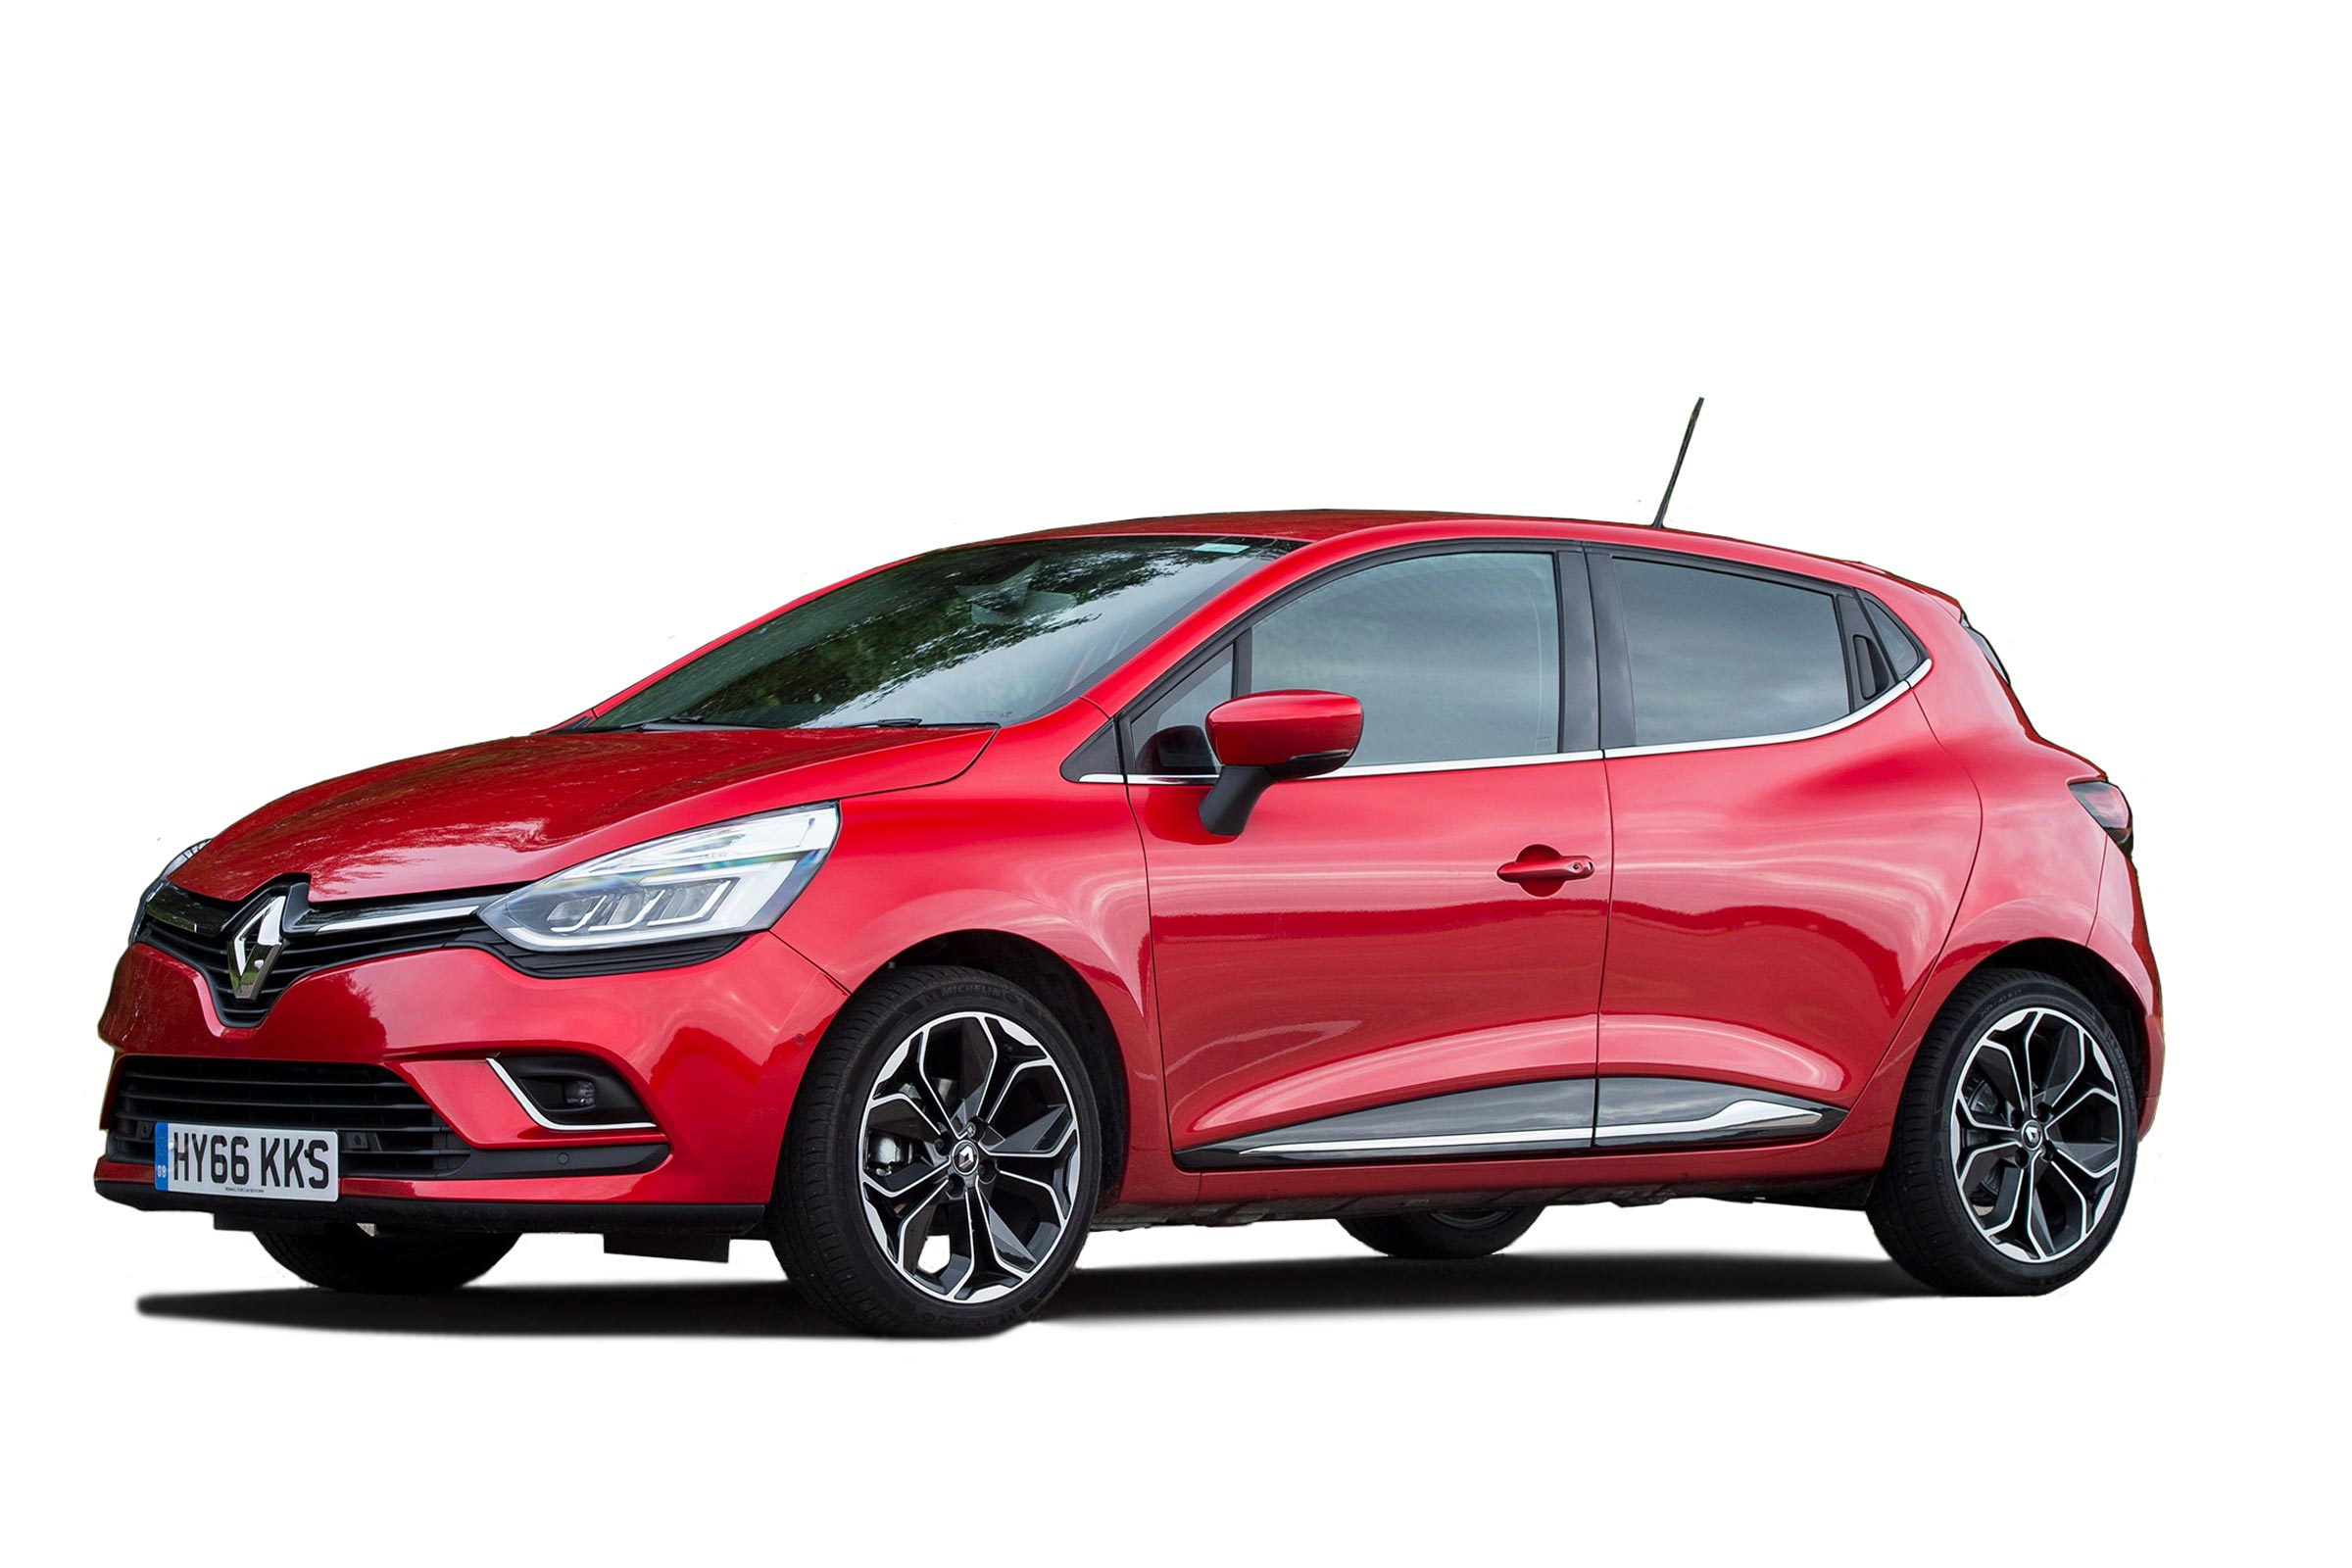 Renault Clio hatchback (2013-2019) | owner reviews: MPG, Problems &  Reliability | Carbuyer